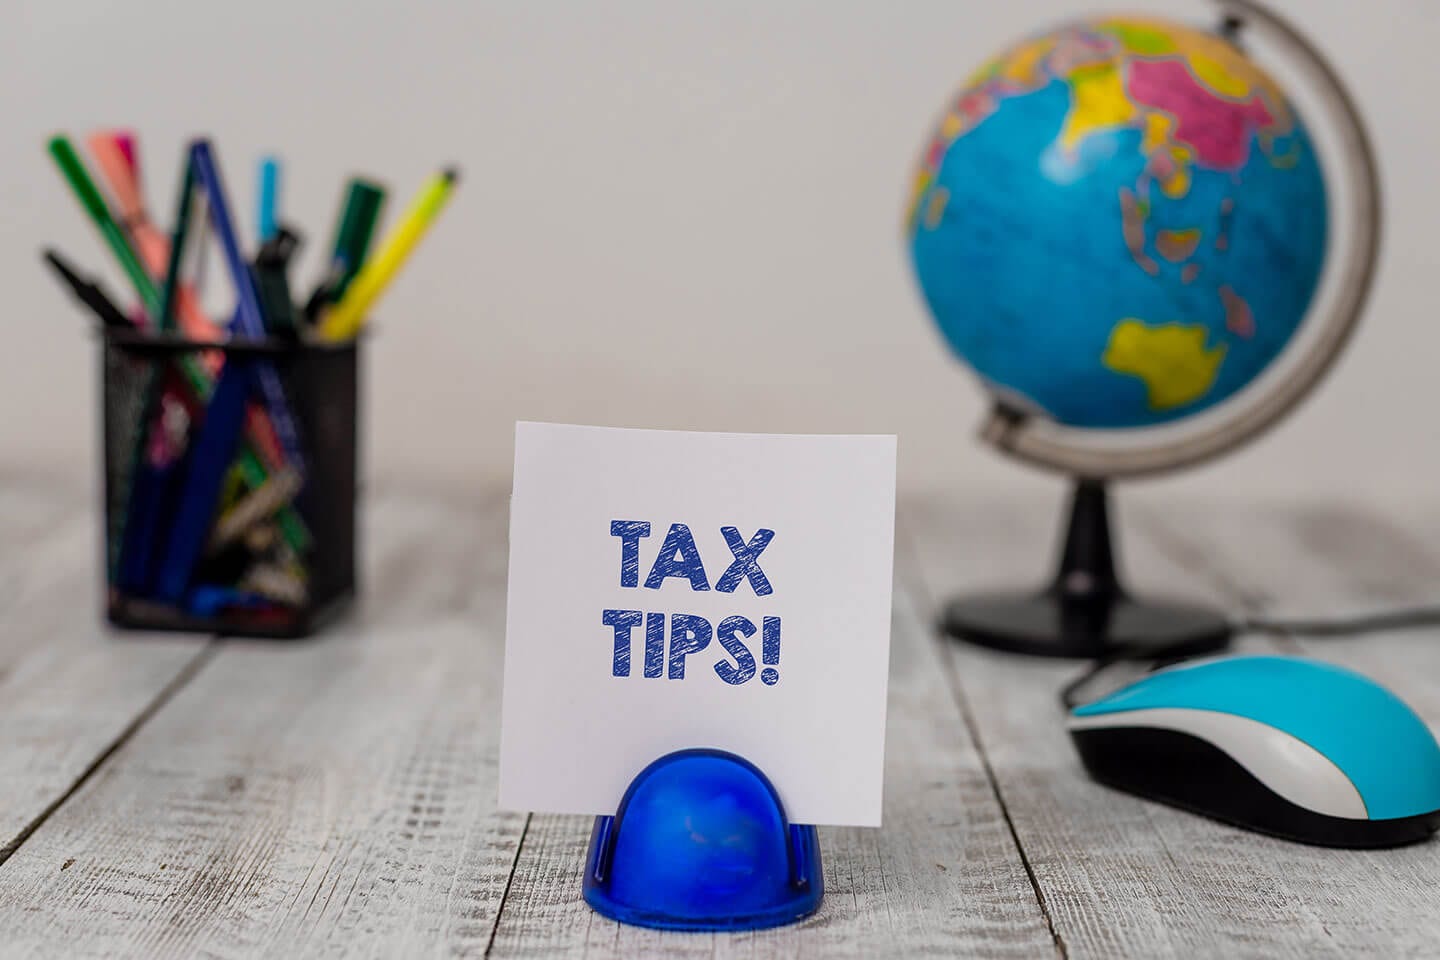 Small globe with colorful pencils and a blue mouse sitting on a wooden desk with a sign that says tax tips